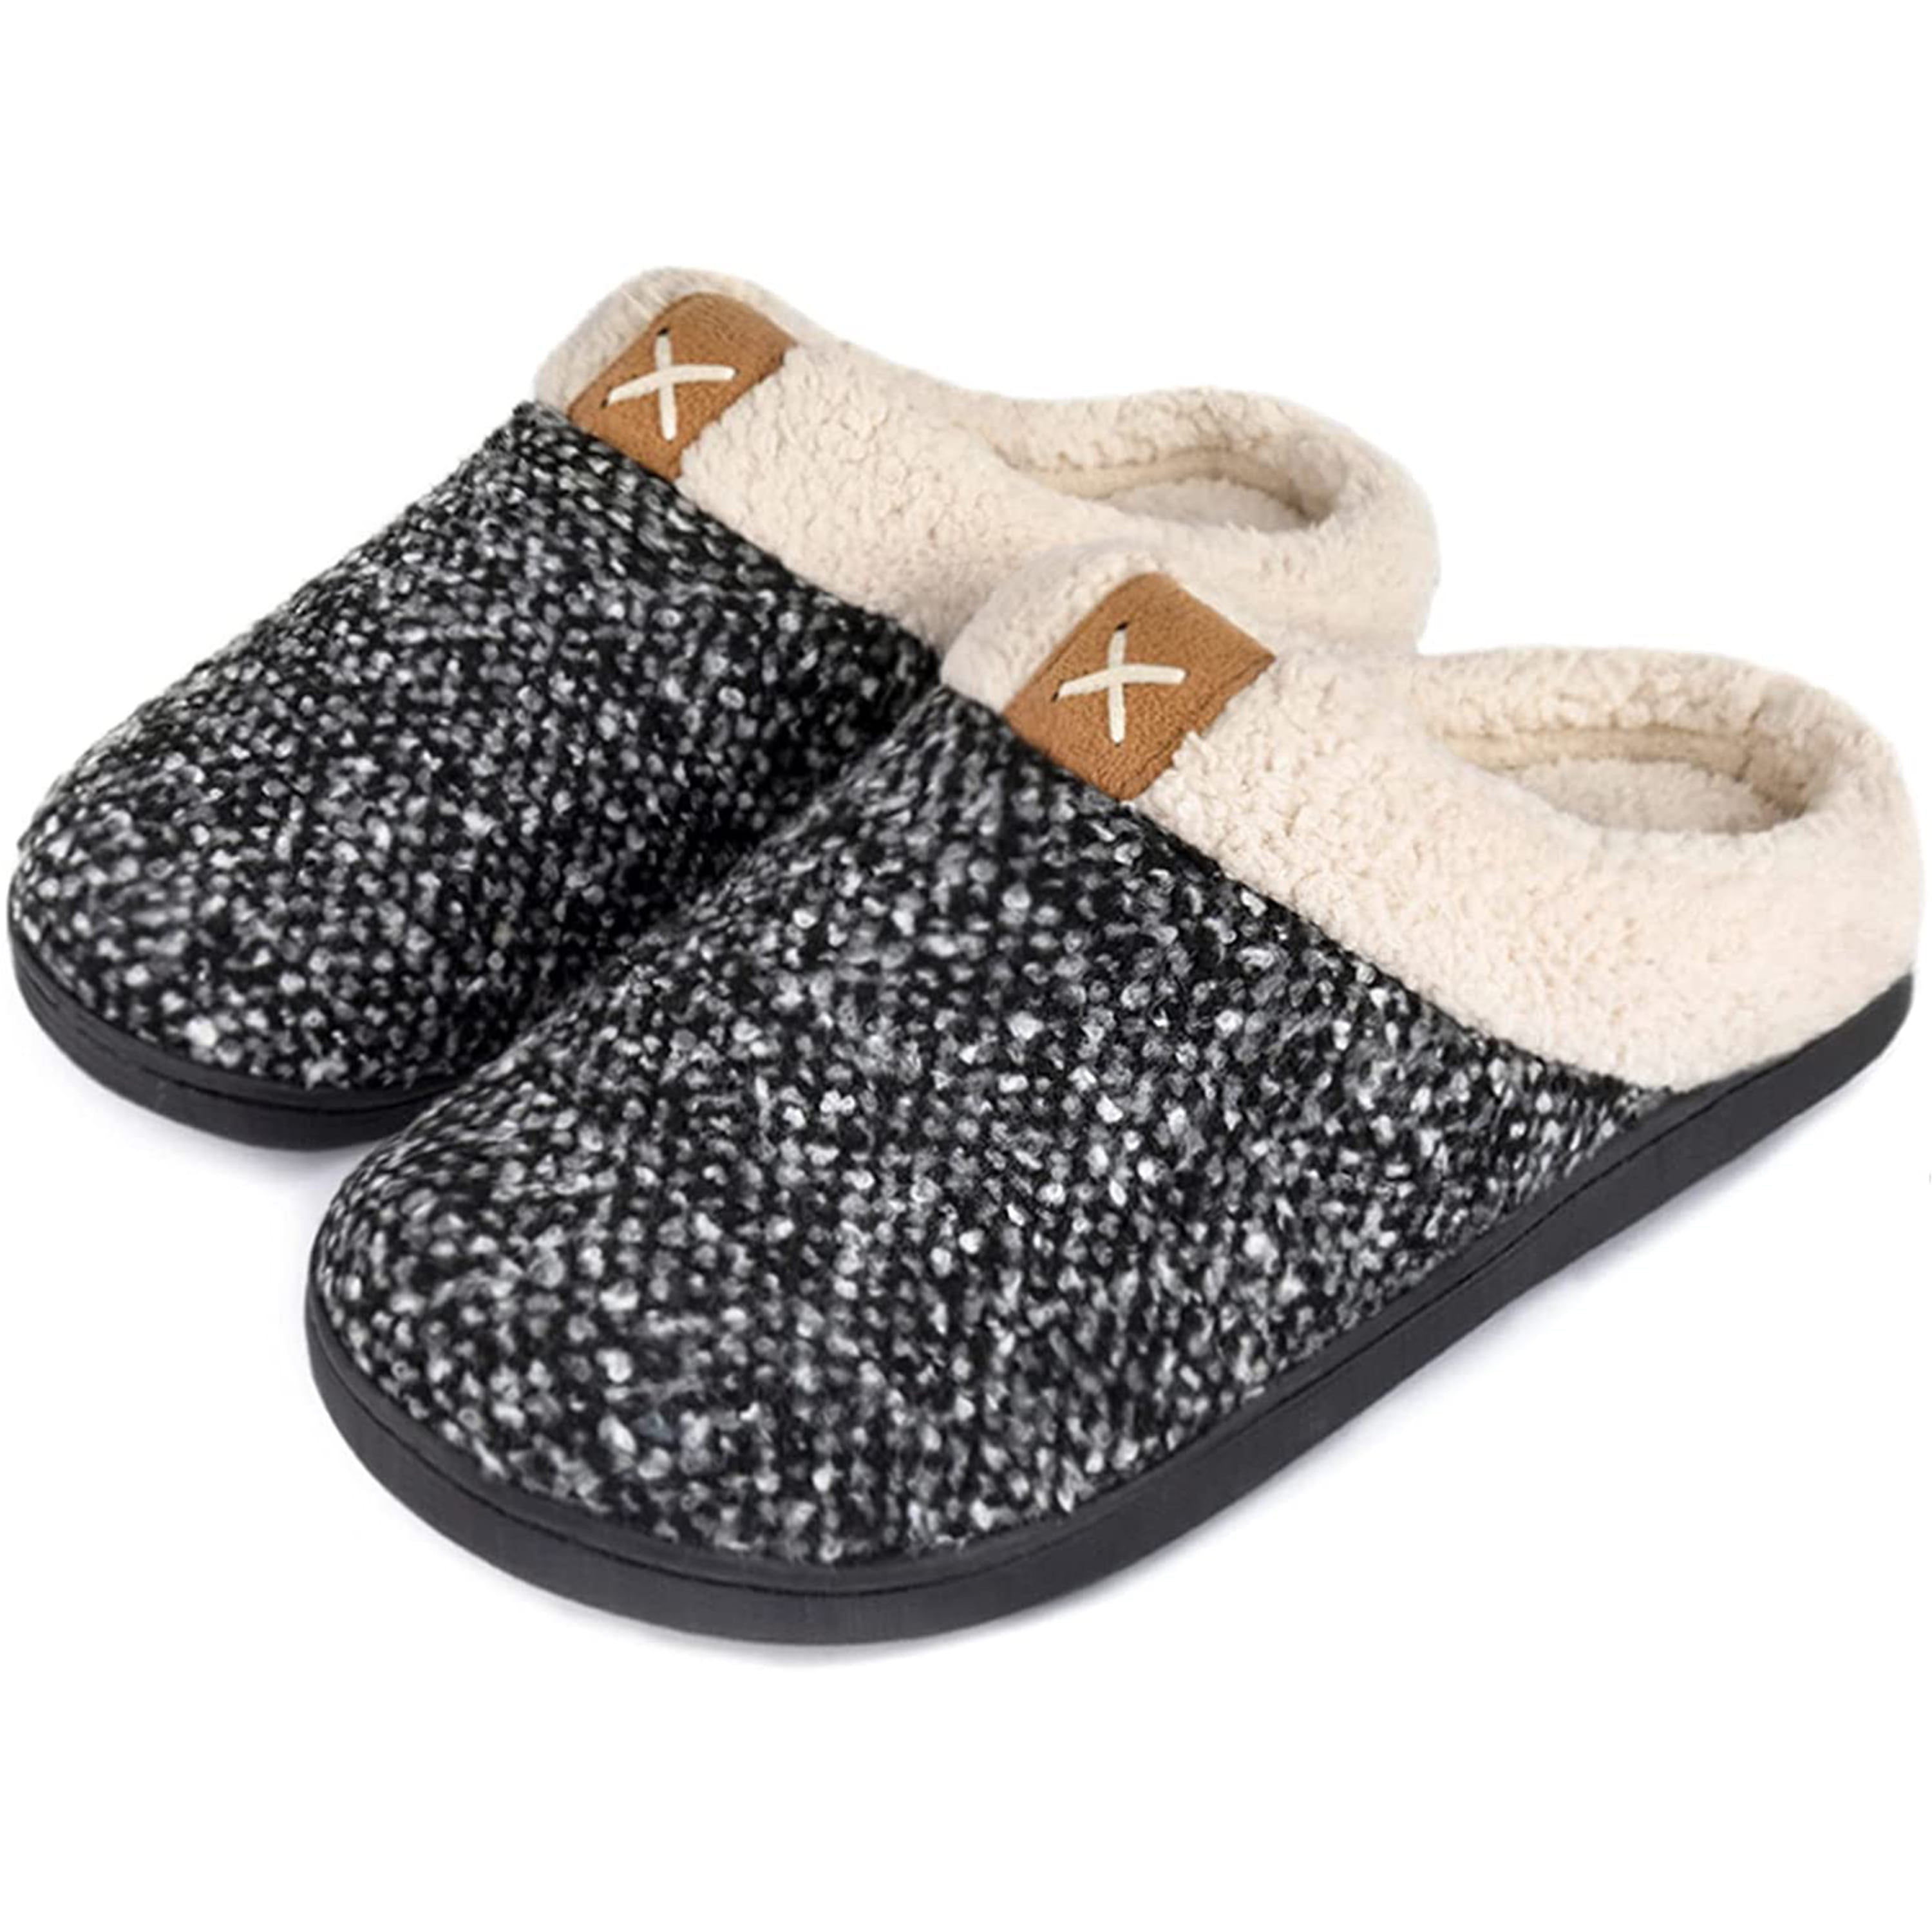 MENS GREY SLIPPERS COSY MEMORY FOAM FAUX FUR LINED HARD SOLE GENTS MULES SIZE